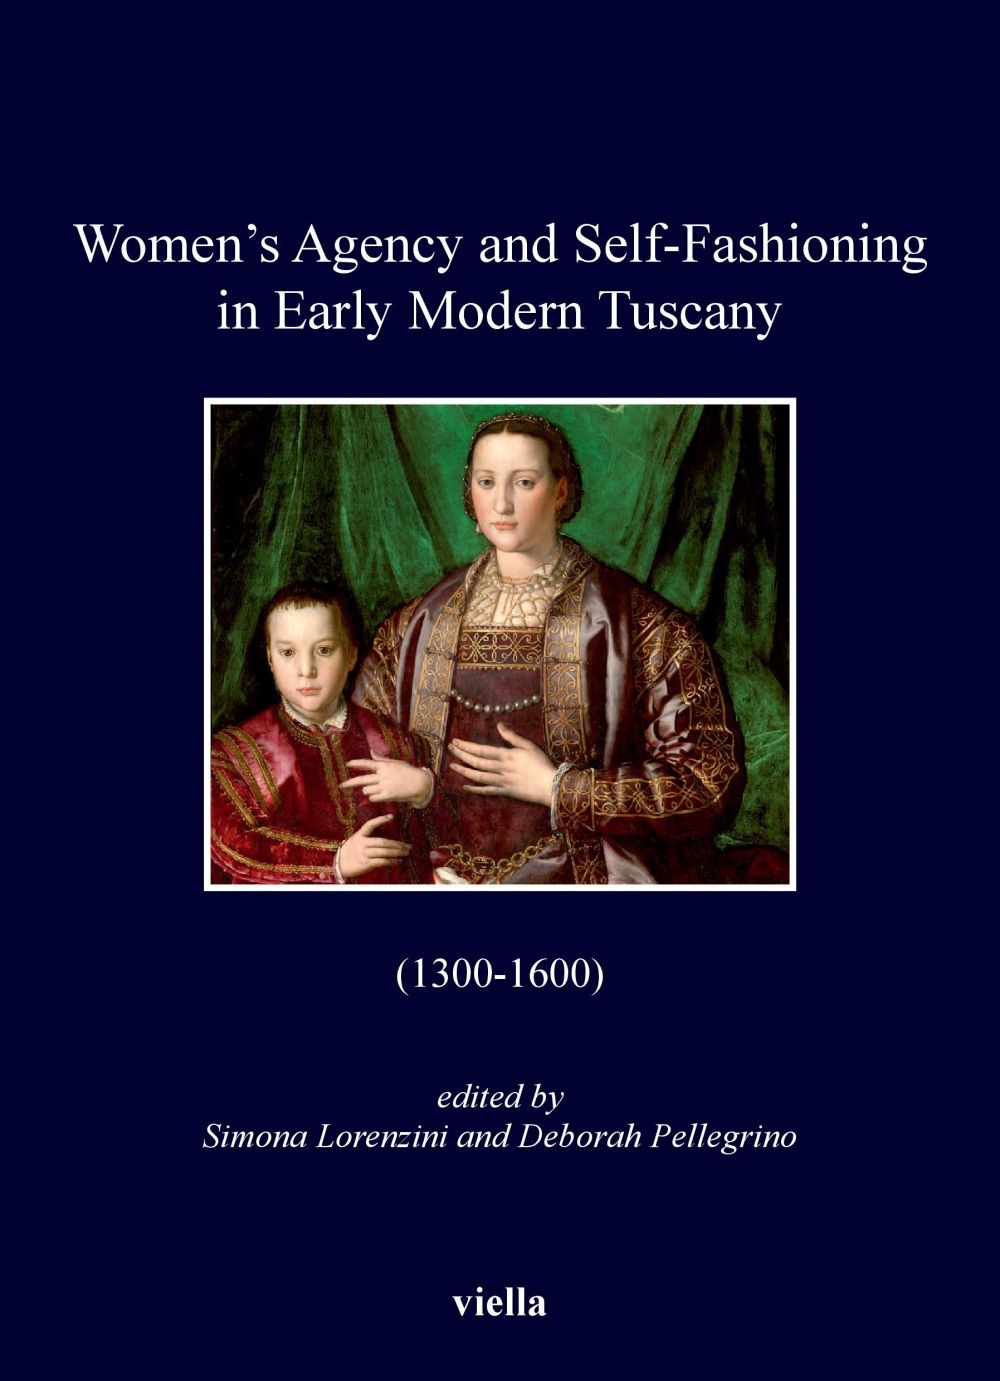 Women’s Agency and Self-Fashioning in Early Modern Tuscany - Librerie.coop